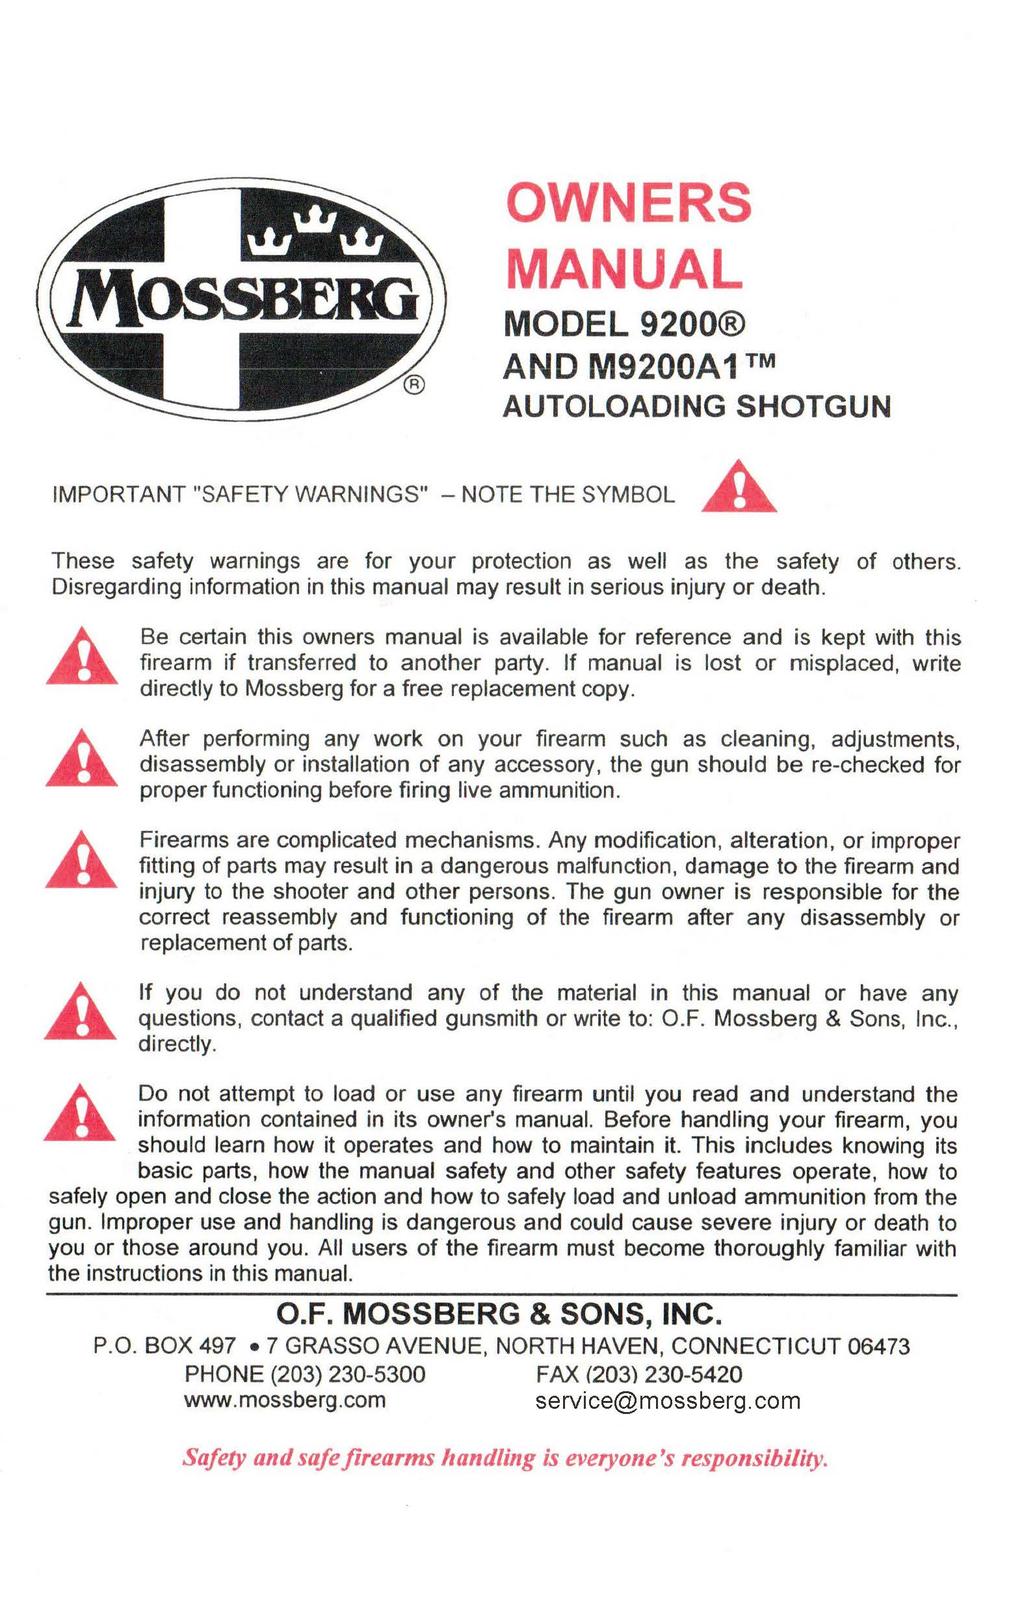 IMPORTNT "SFETY WRNINGS" - NOTE THE SYMBOL OWNERS MNUL MODEL 9200 ND M9200 1 TM UTOLODING SHOTGUN These safety warnings are for your protection as well as the safety of others.